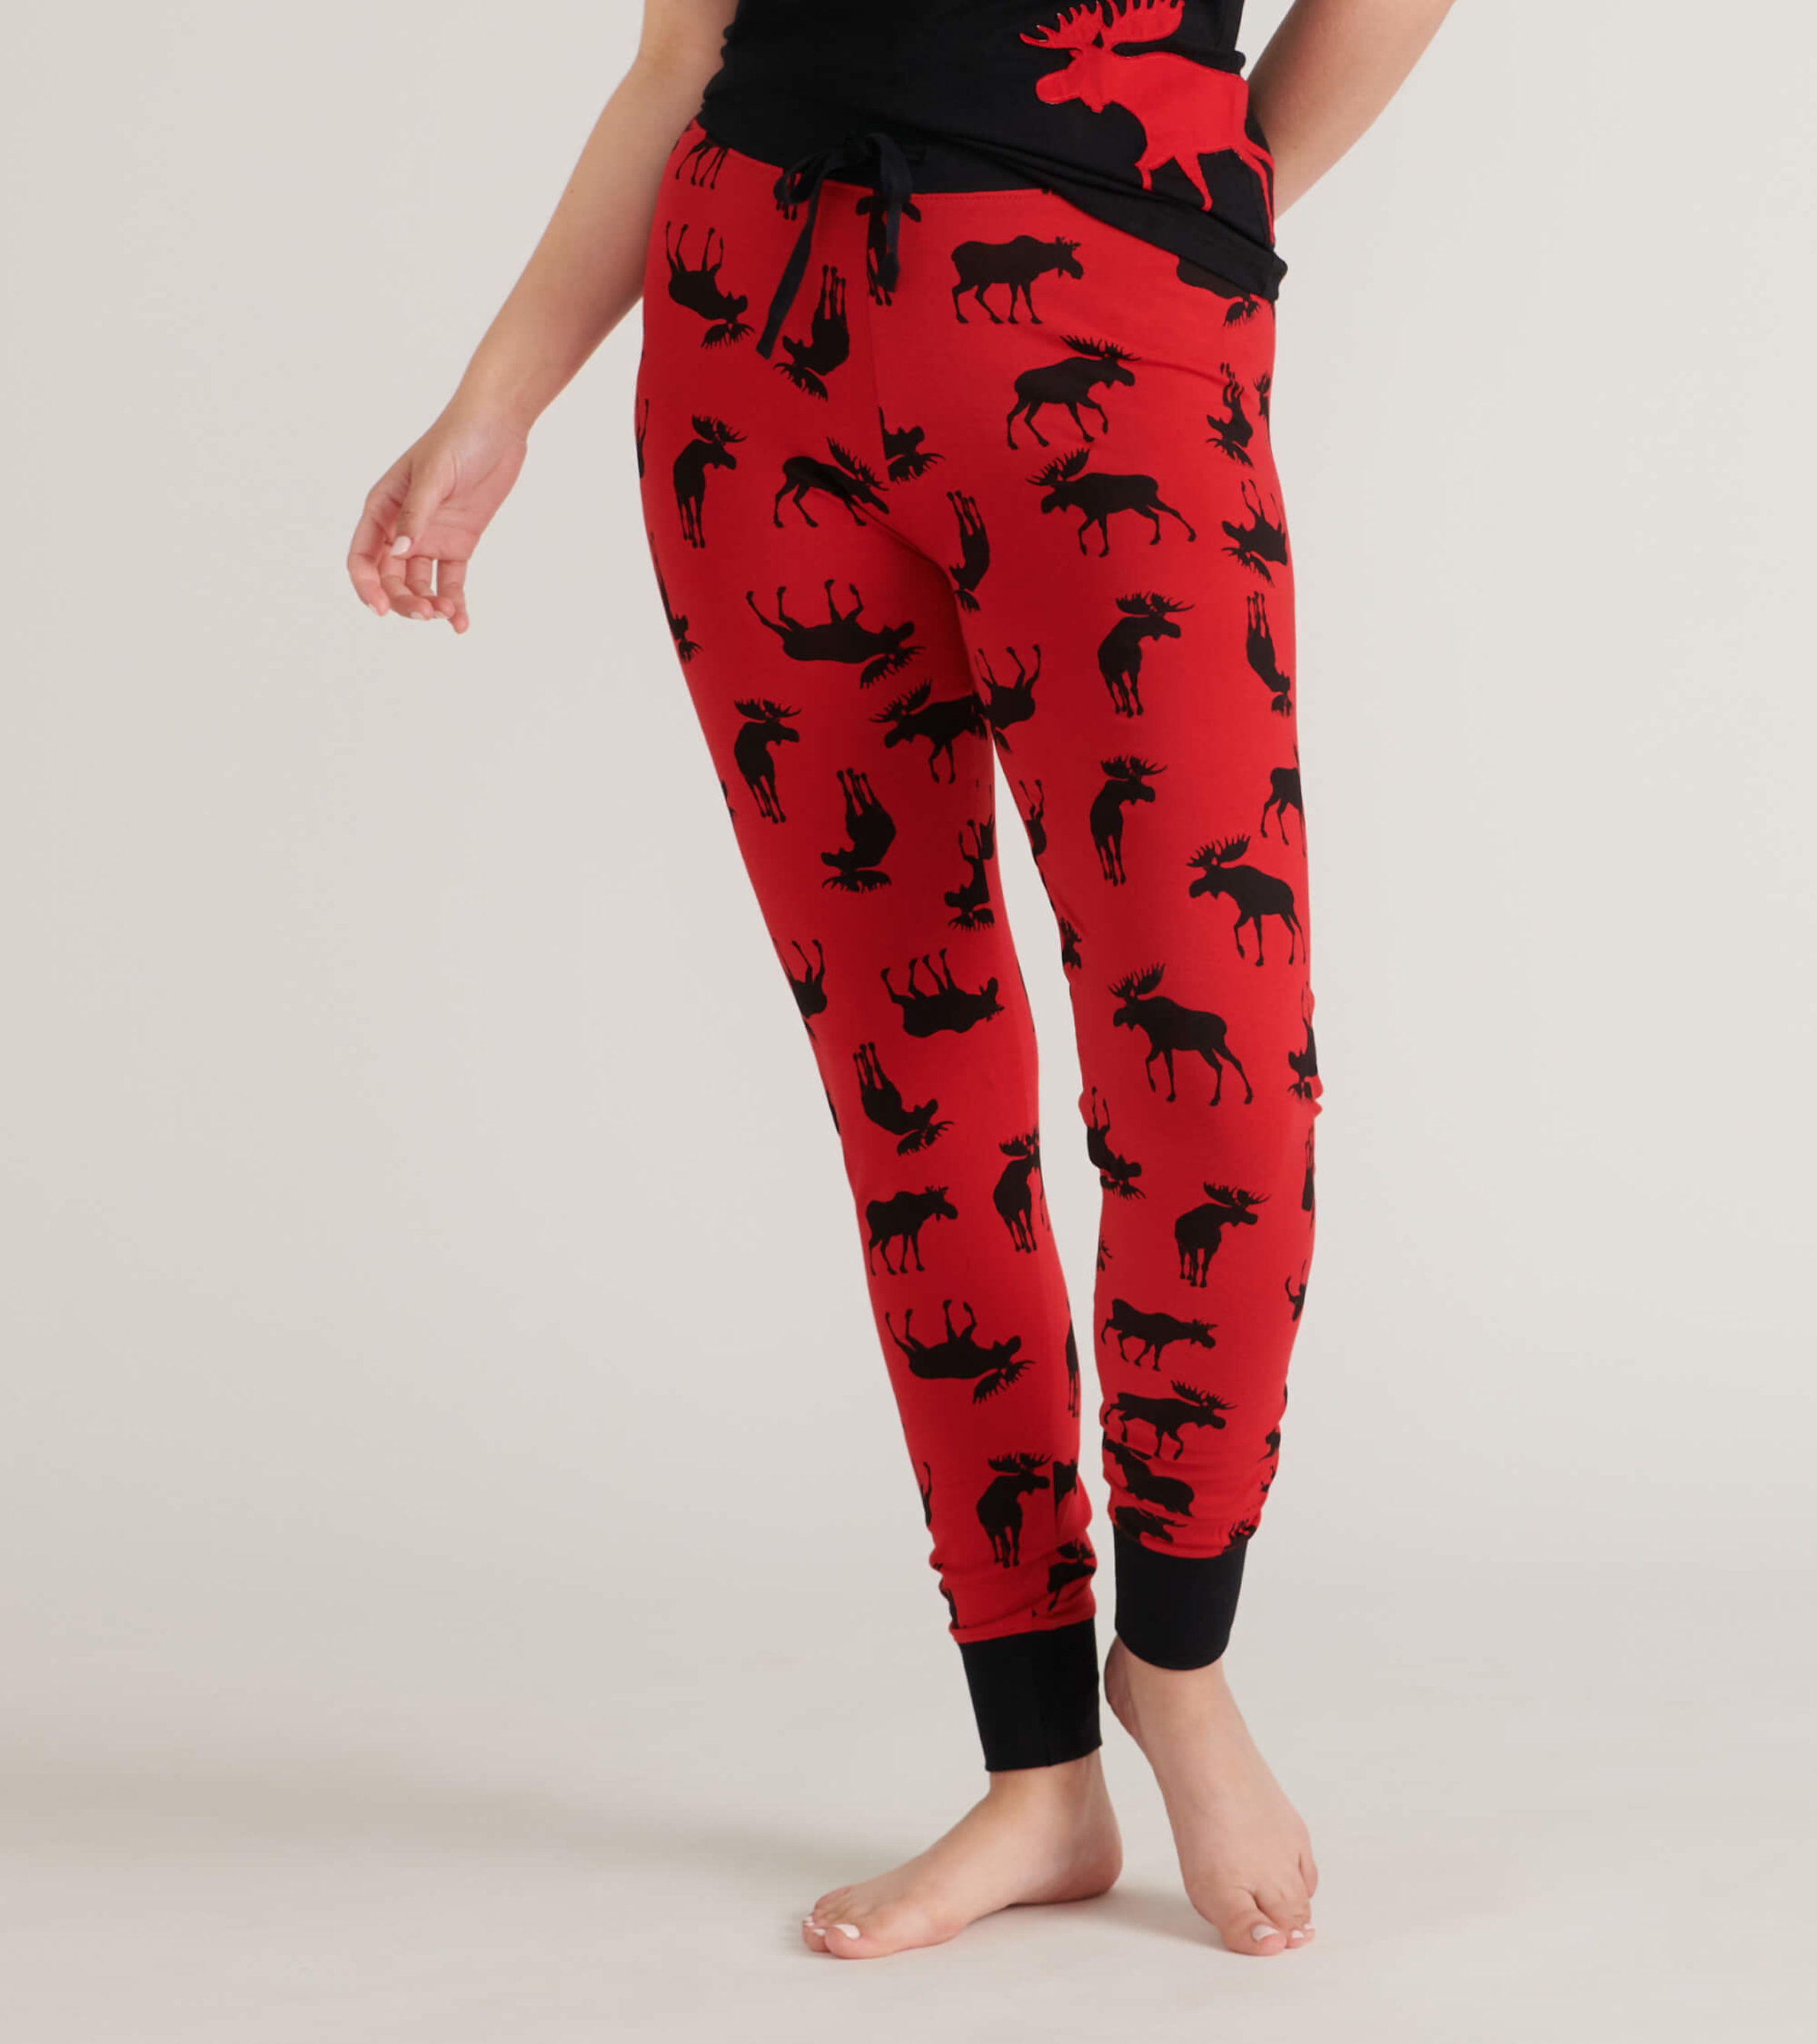 Moose on Red Women's Tee and Leggings Pajama Separates - Little Blue House  US